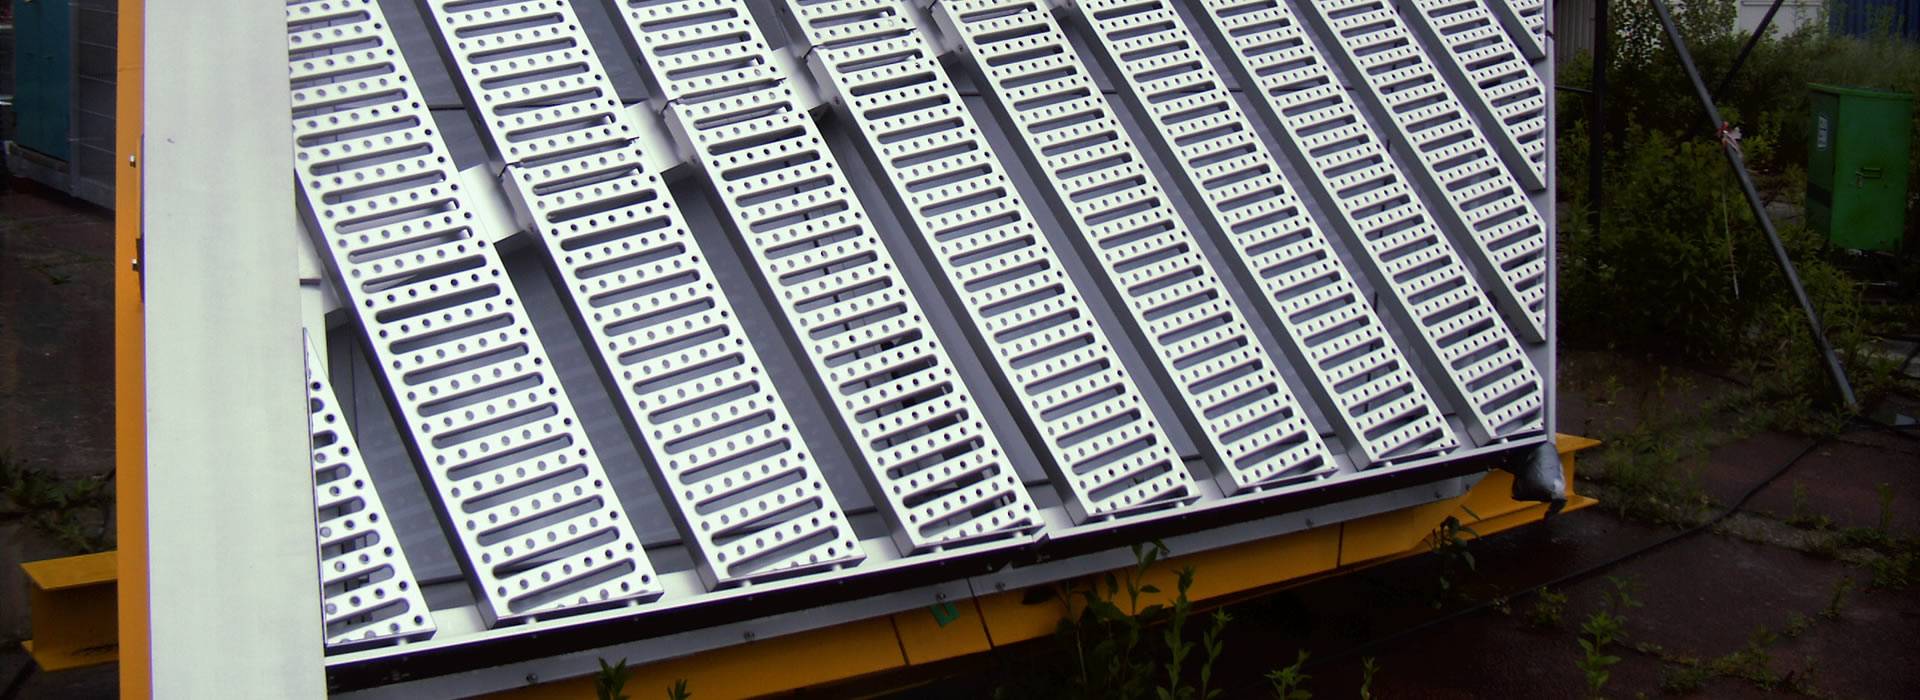 Safety grating are used in industrial or commercial areas where slips or falls may occur.